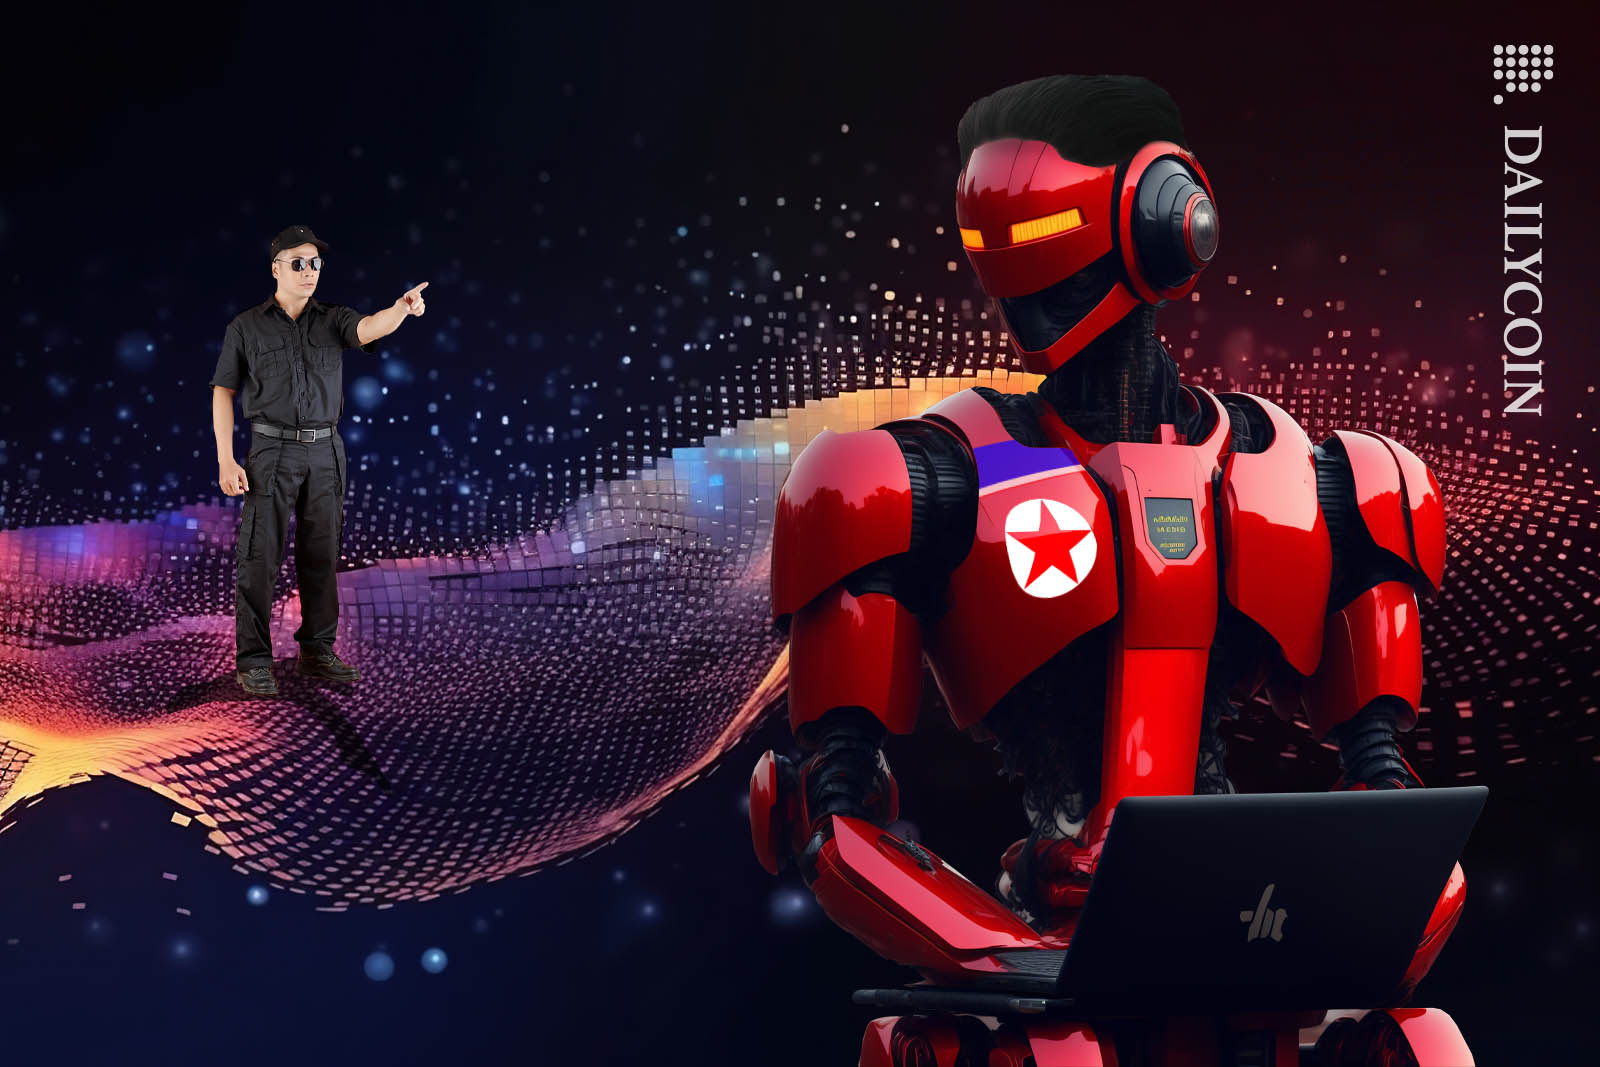 A red robot with North Korean decal and Kim Jong Un style hair being cough red handed in a digital space.